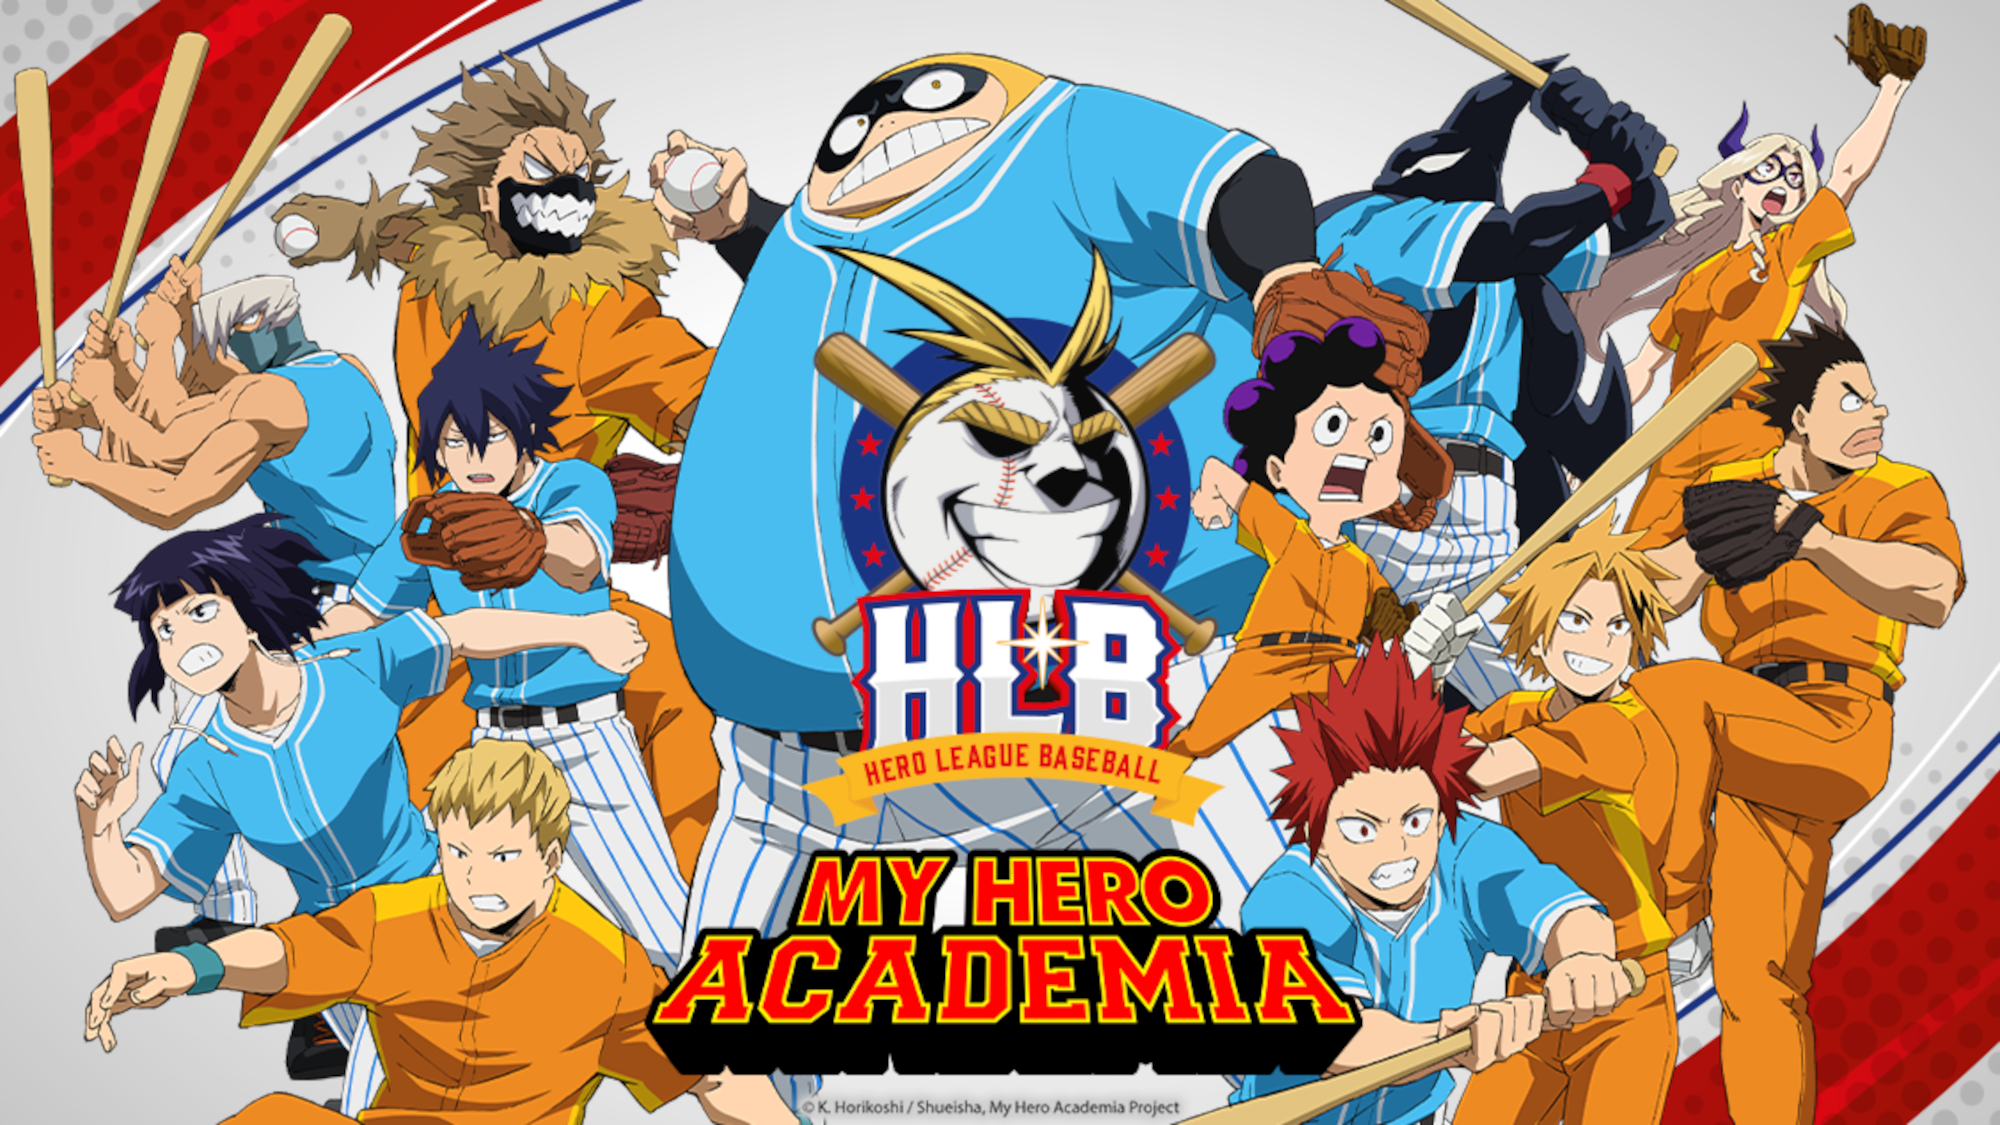 Key art for 'My Hero Academia' Season 5's OVA episodes, which are coming to Crunchyroll in August. It features Class 1-A dressed in baseball uniforms.